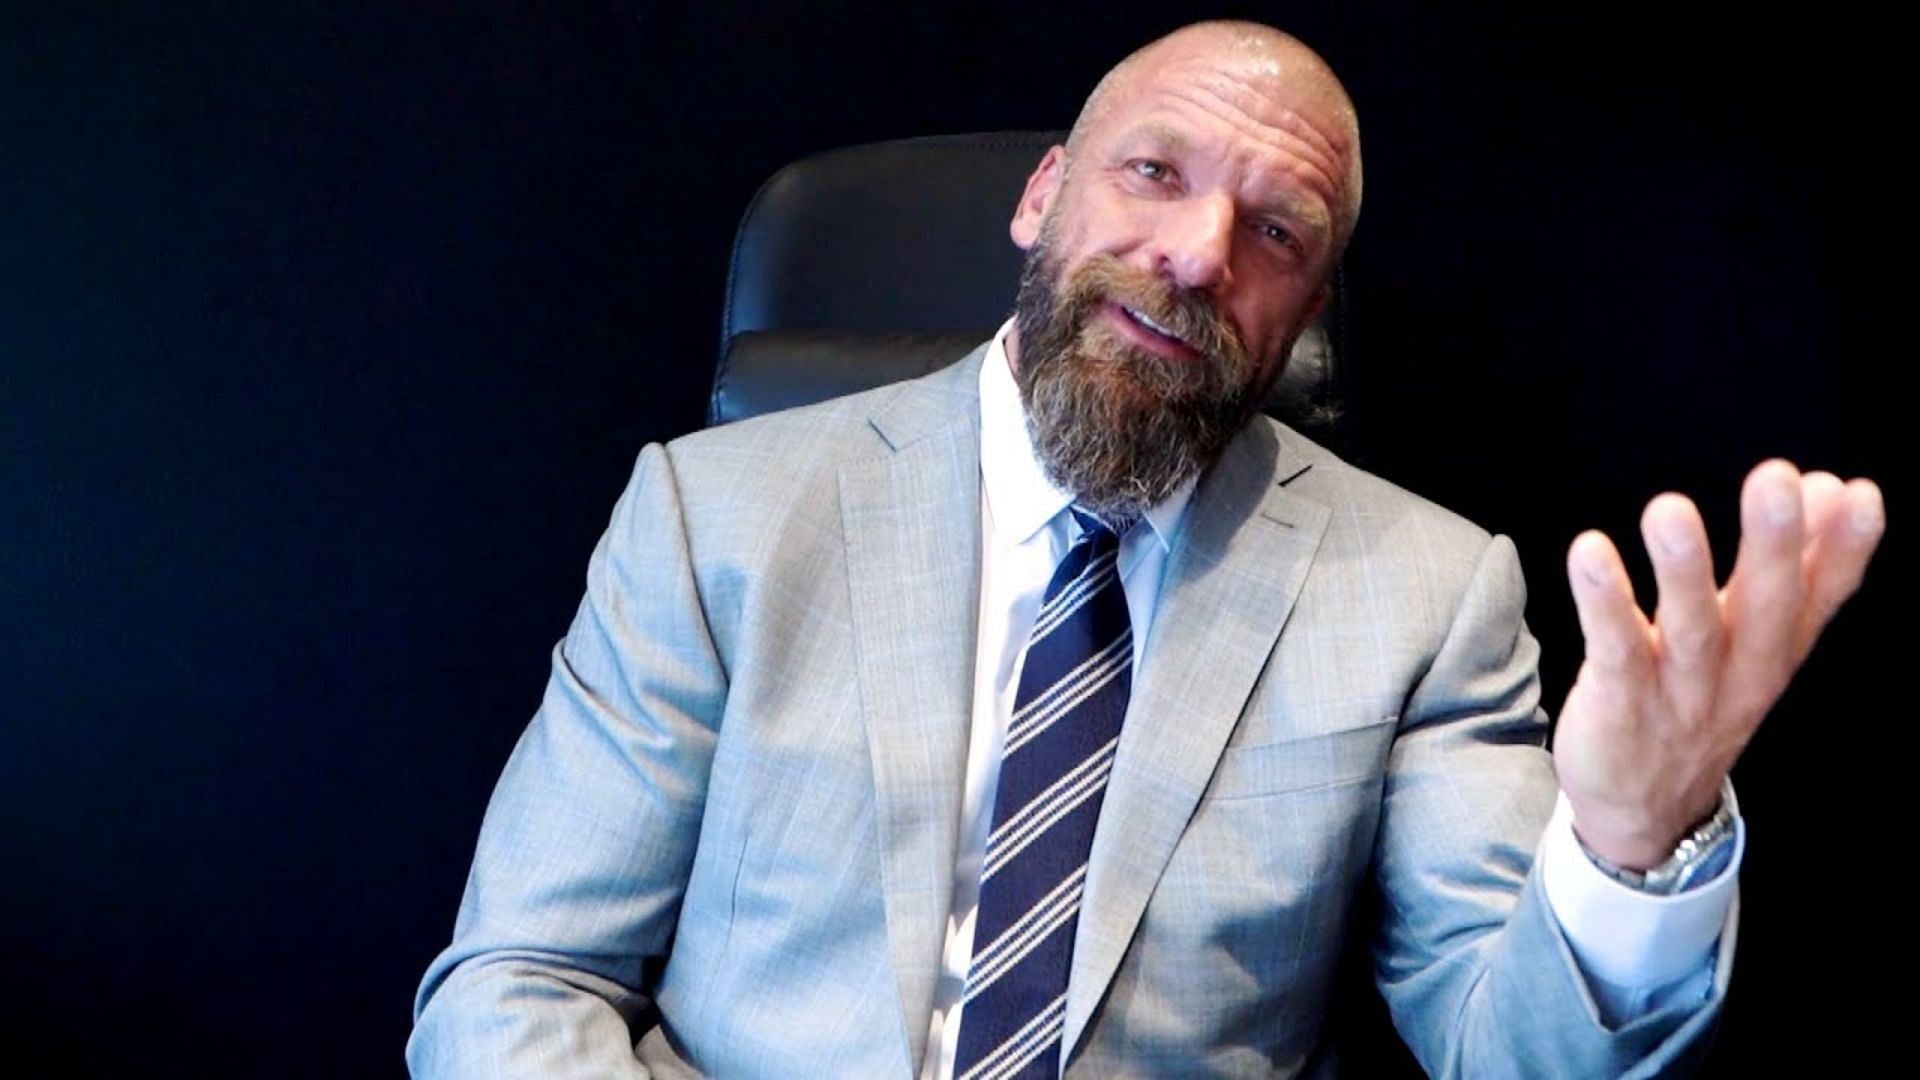 Triple H has signed many close friends to Executive positions in WWE.